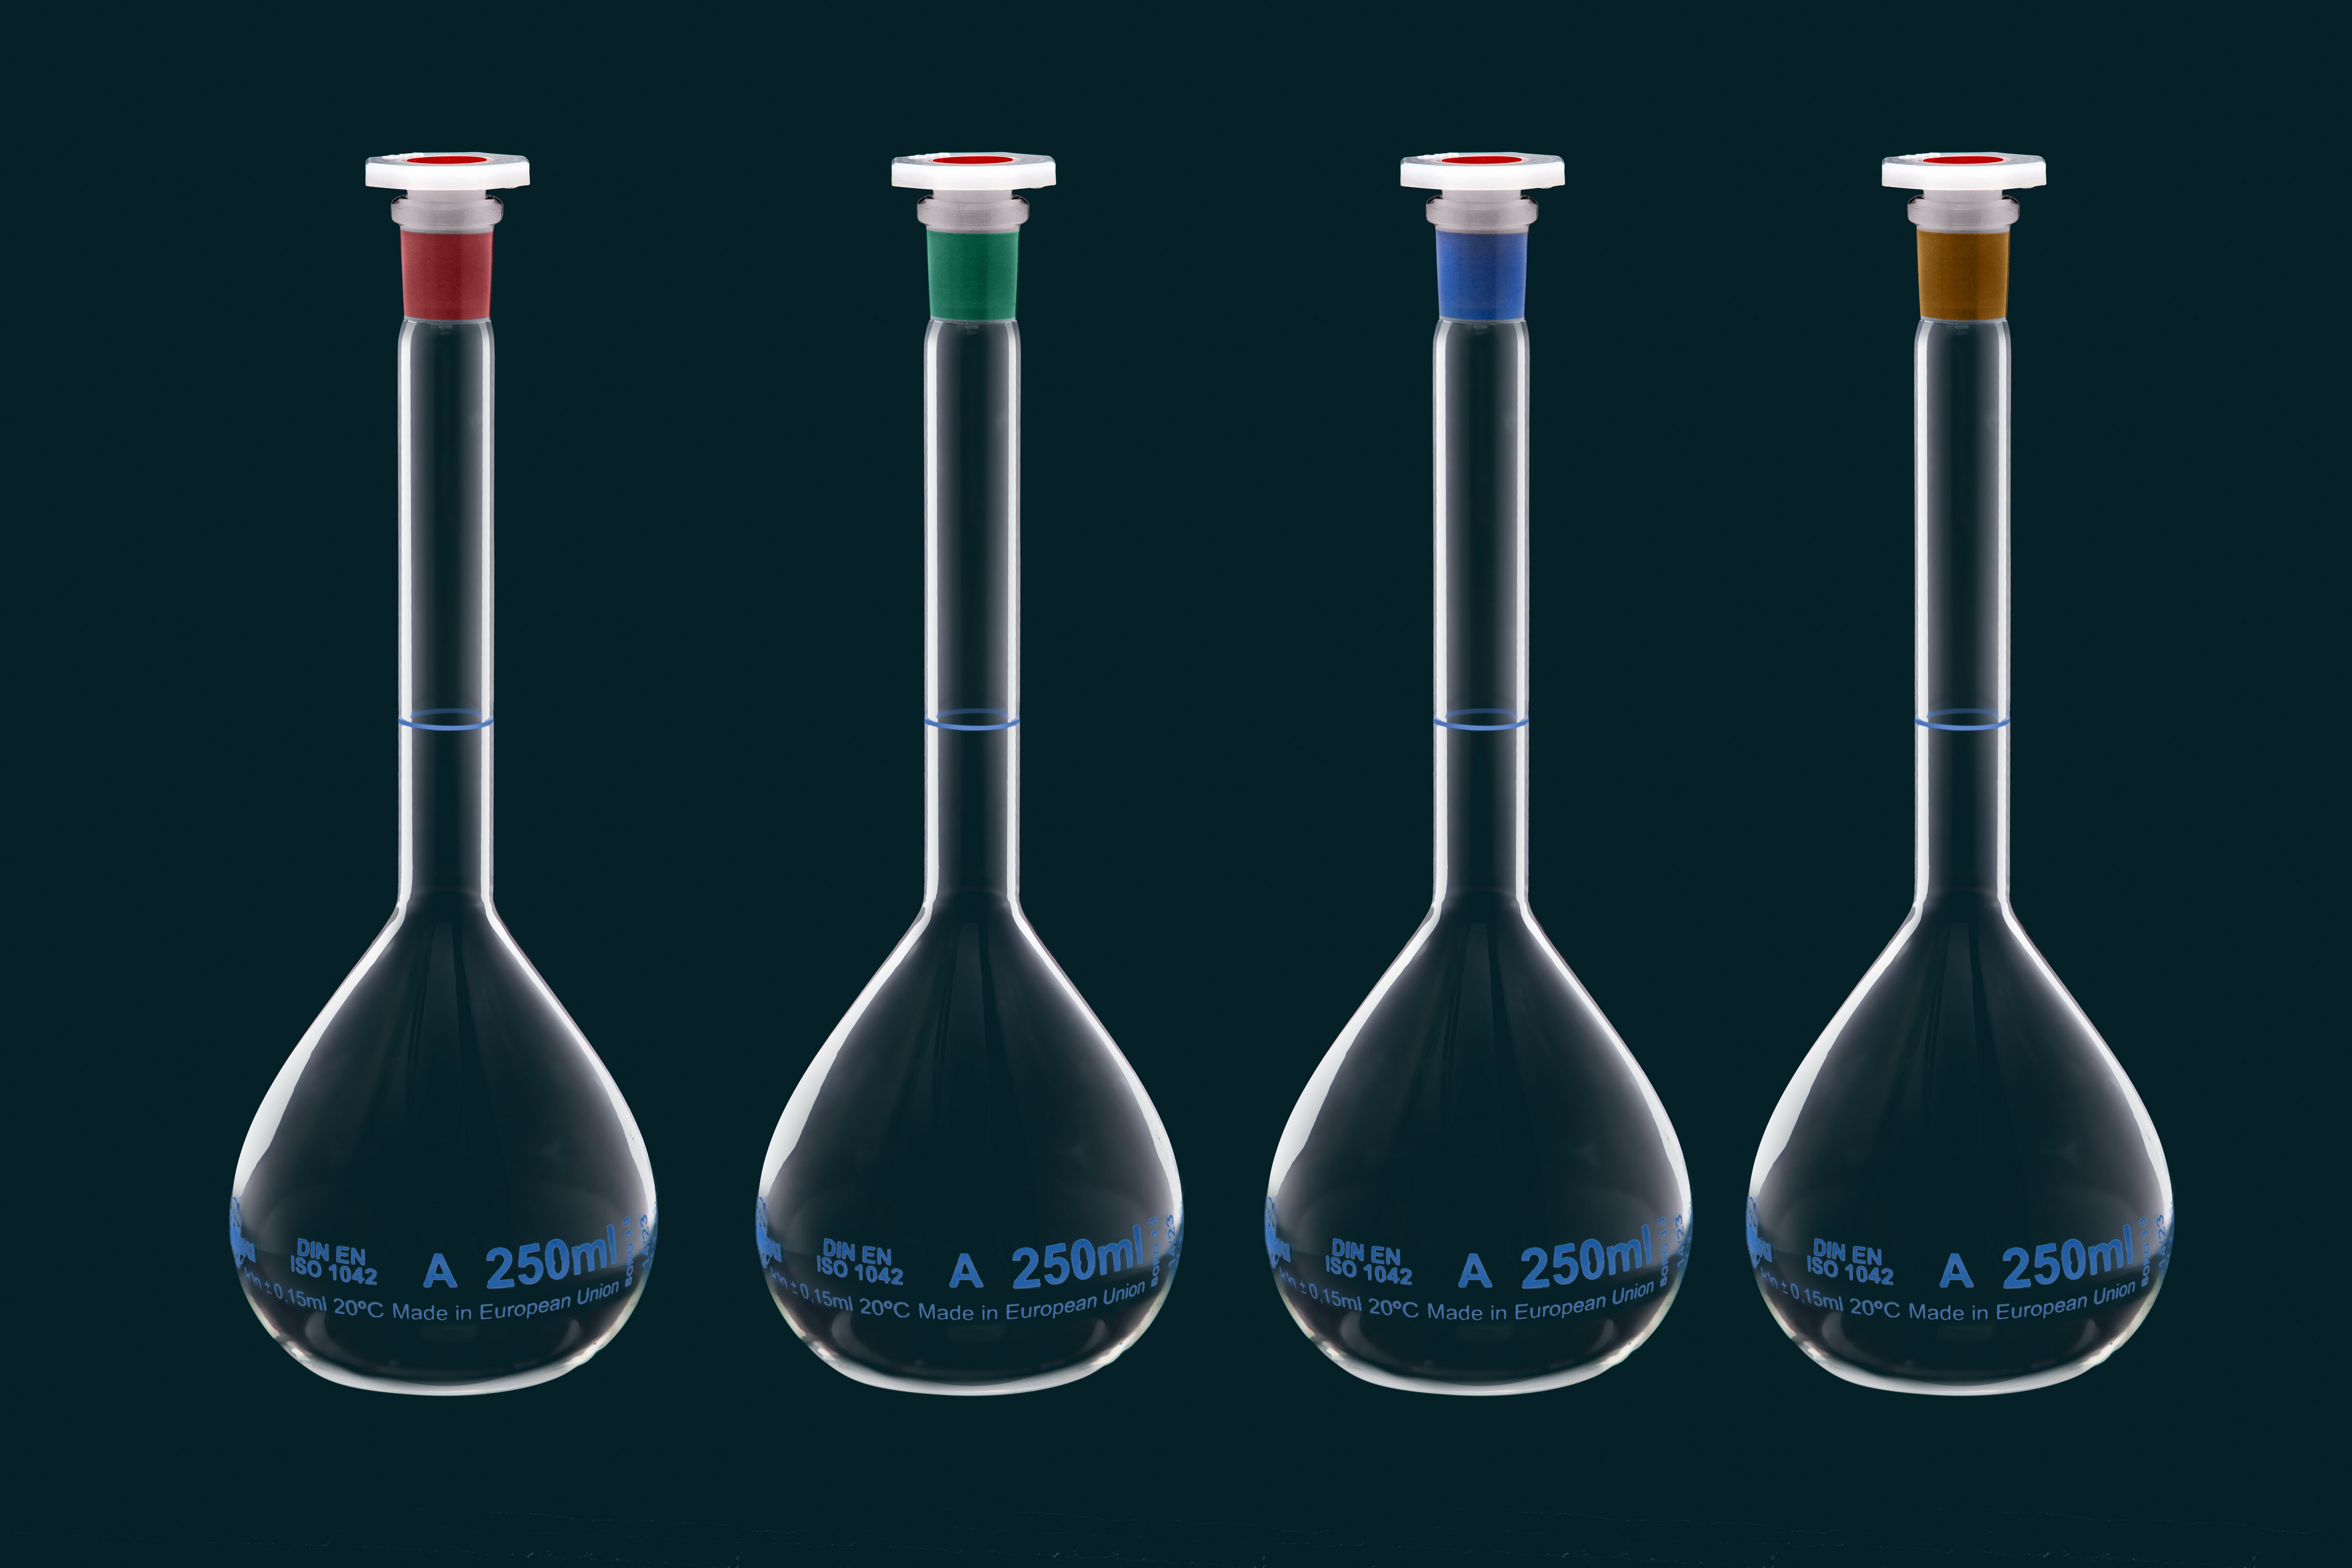 Volumetric flask with red neck, Class A, 1000 ml, with PE stopper, lot number and certificate of conformity